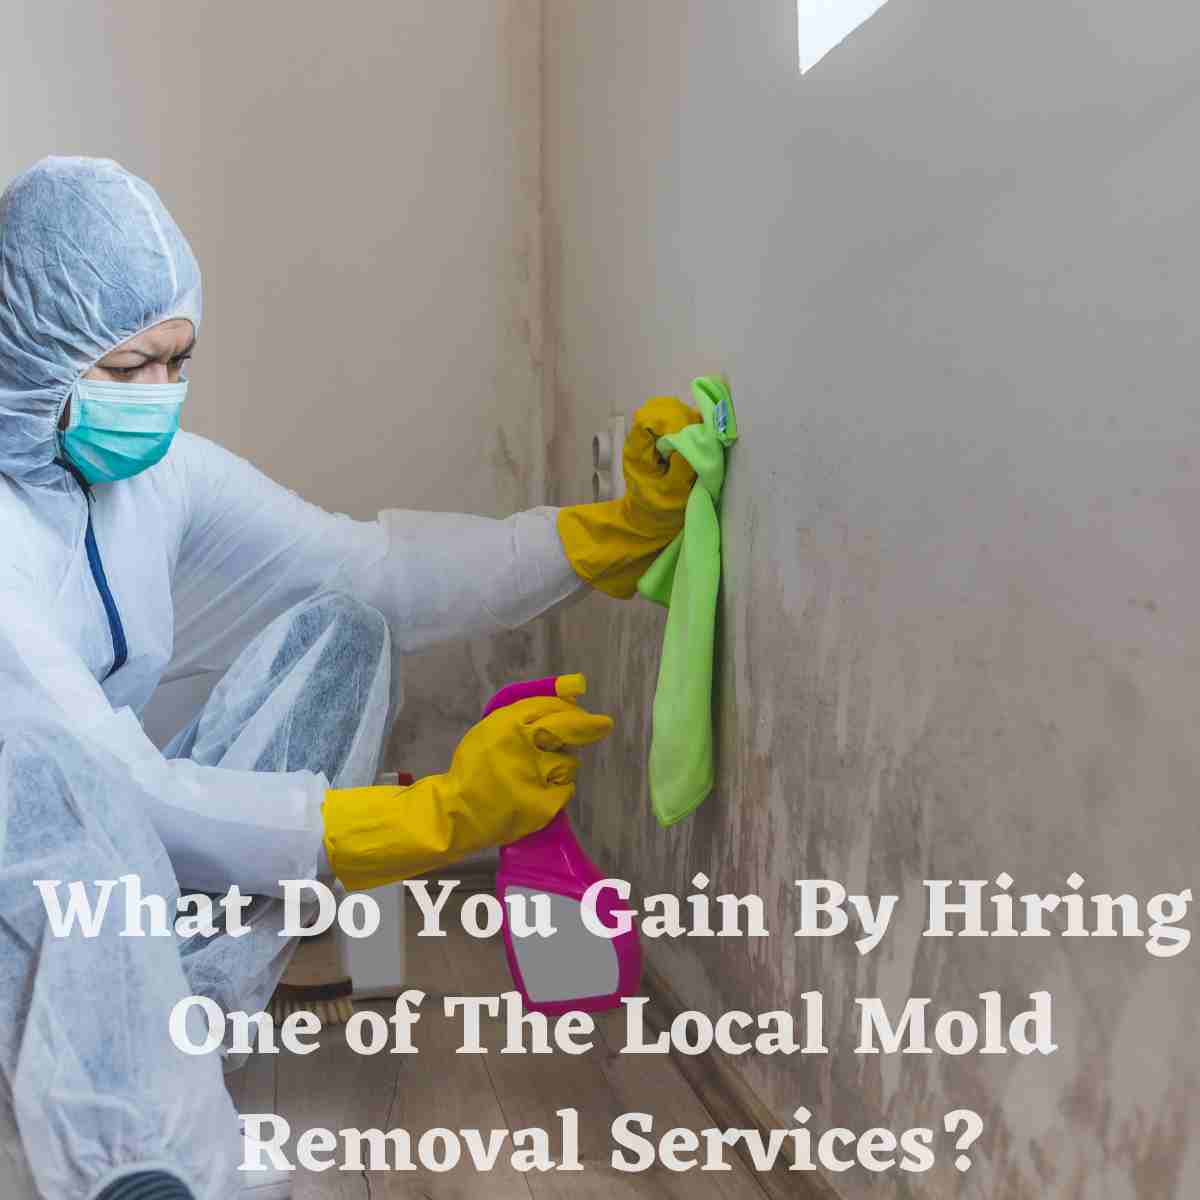 Hiring One of The Local Mold Removal Services